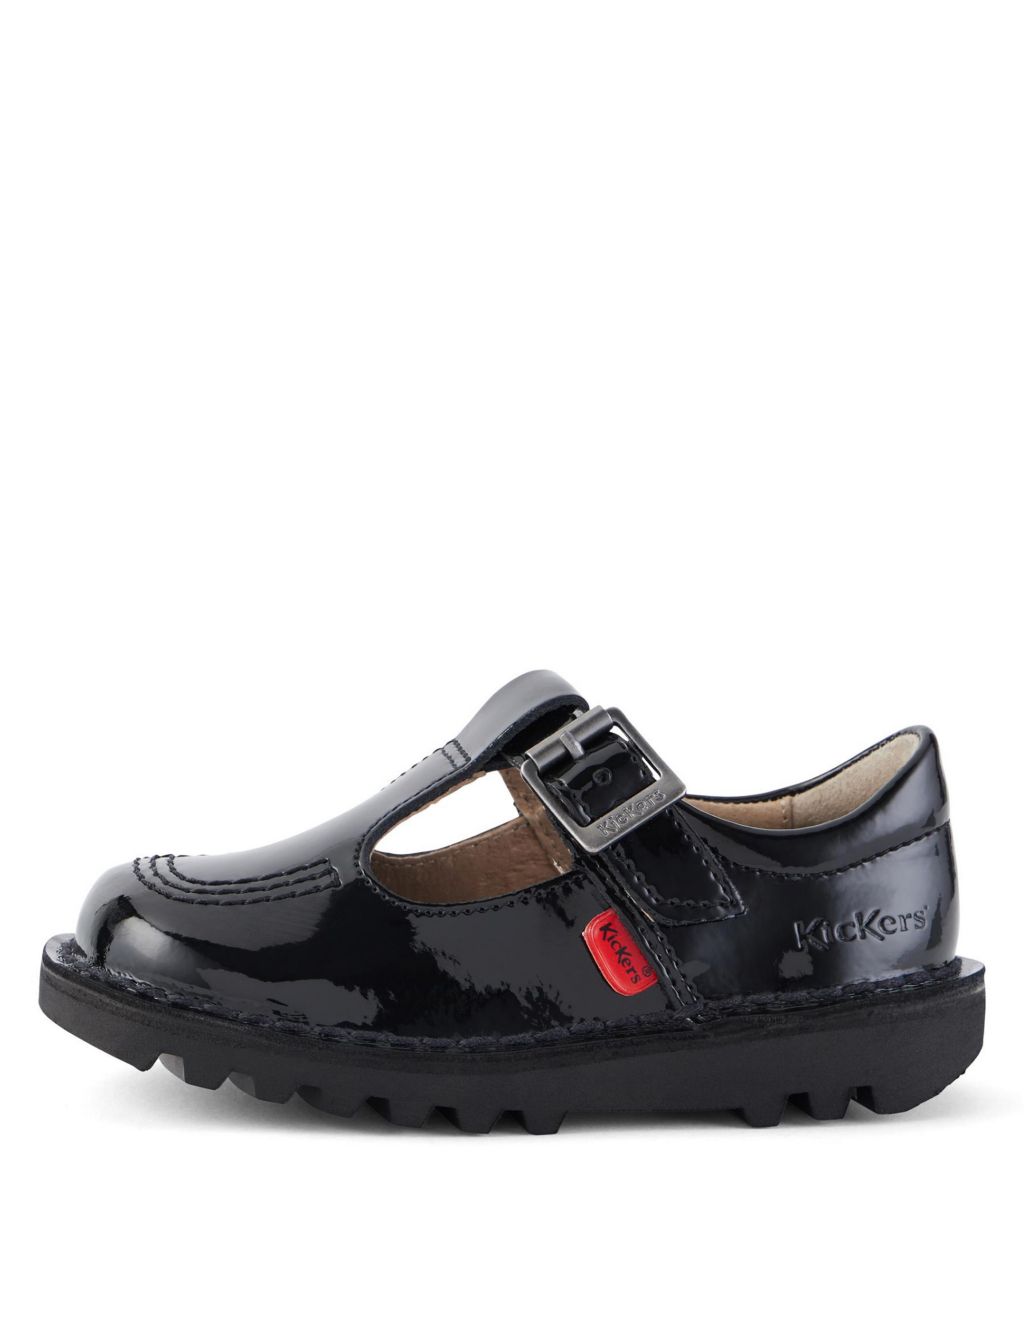 Kids' Patent Leather School Shoes image 1